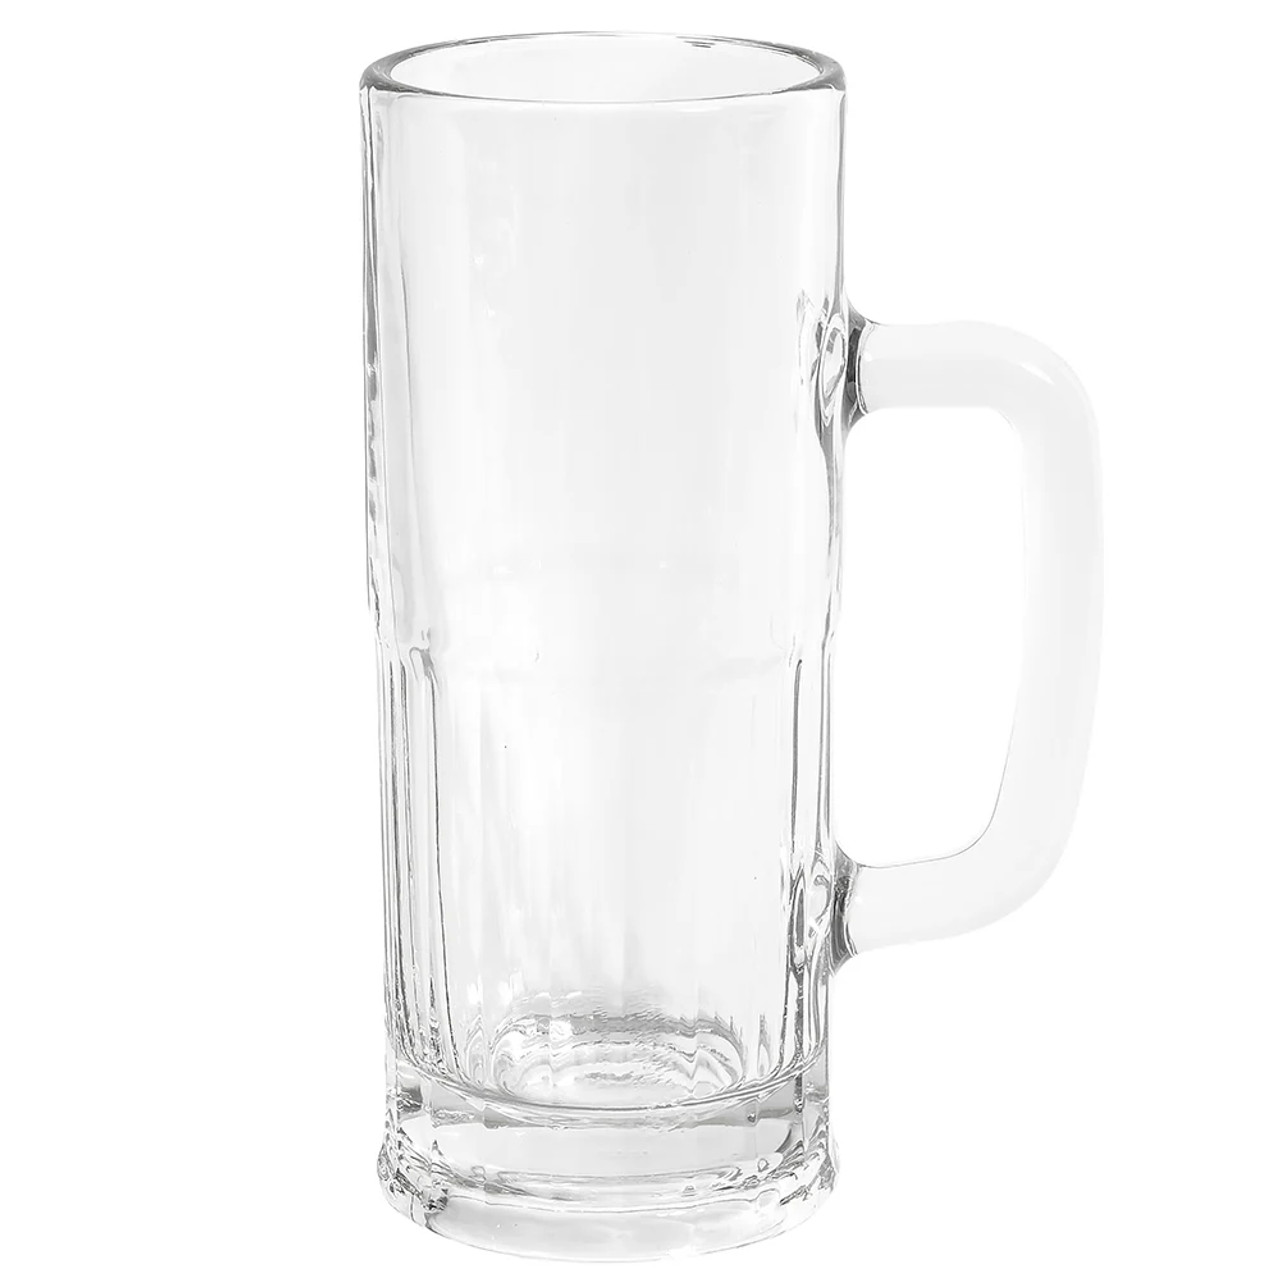 Libbey 5360 22 oz Beer Glass, Thick Glass, Sturdy Handle, 12/Case - Chicken Pieces